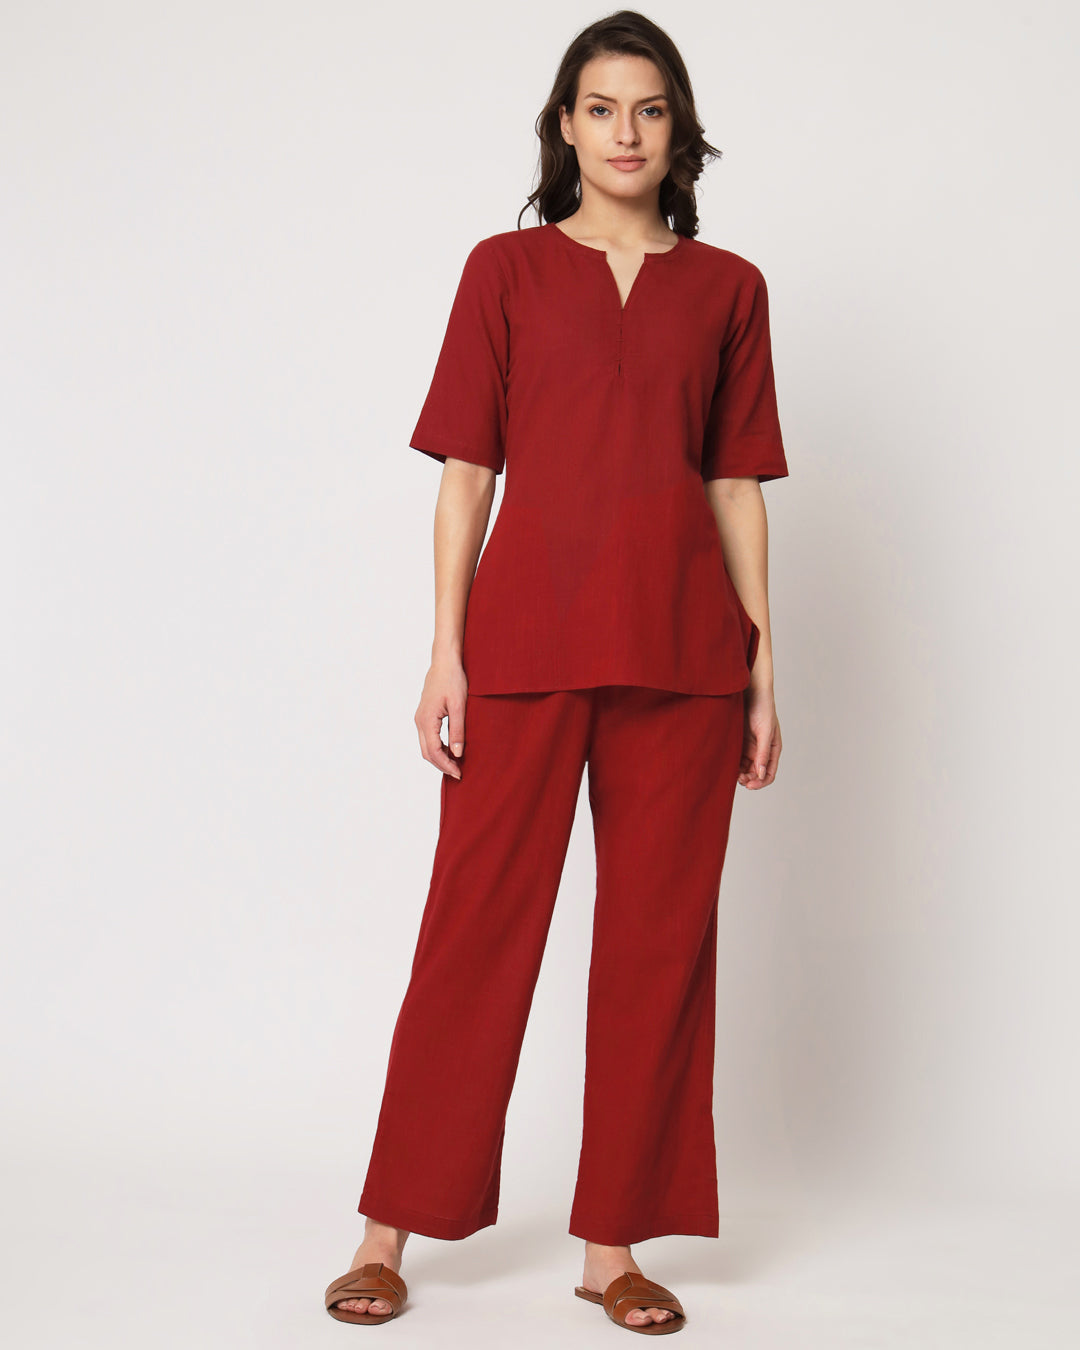 Classic Red Collar Neck Short Length Solid Kurta (Without Bottoms)